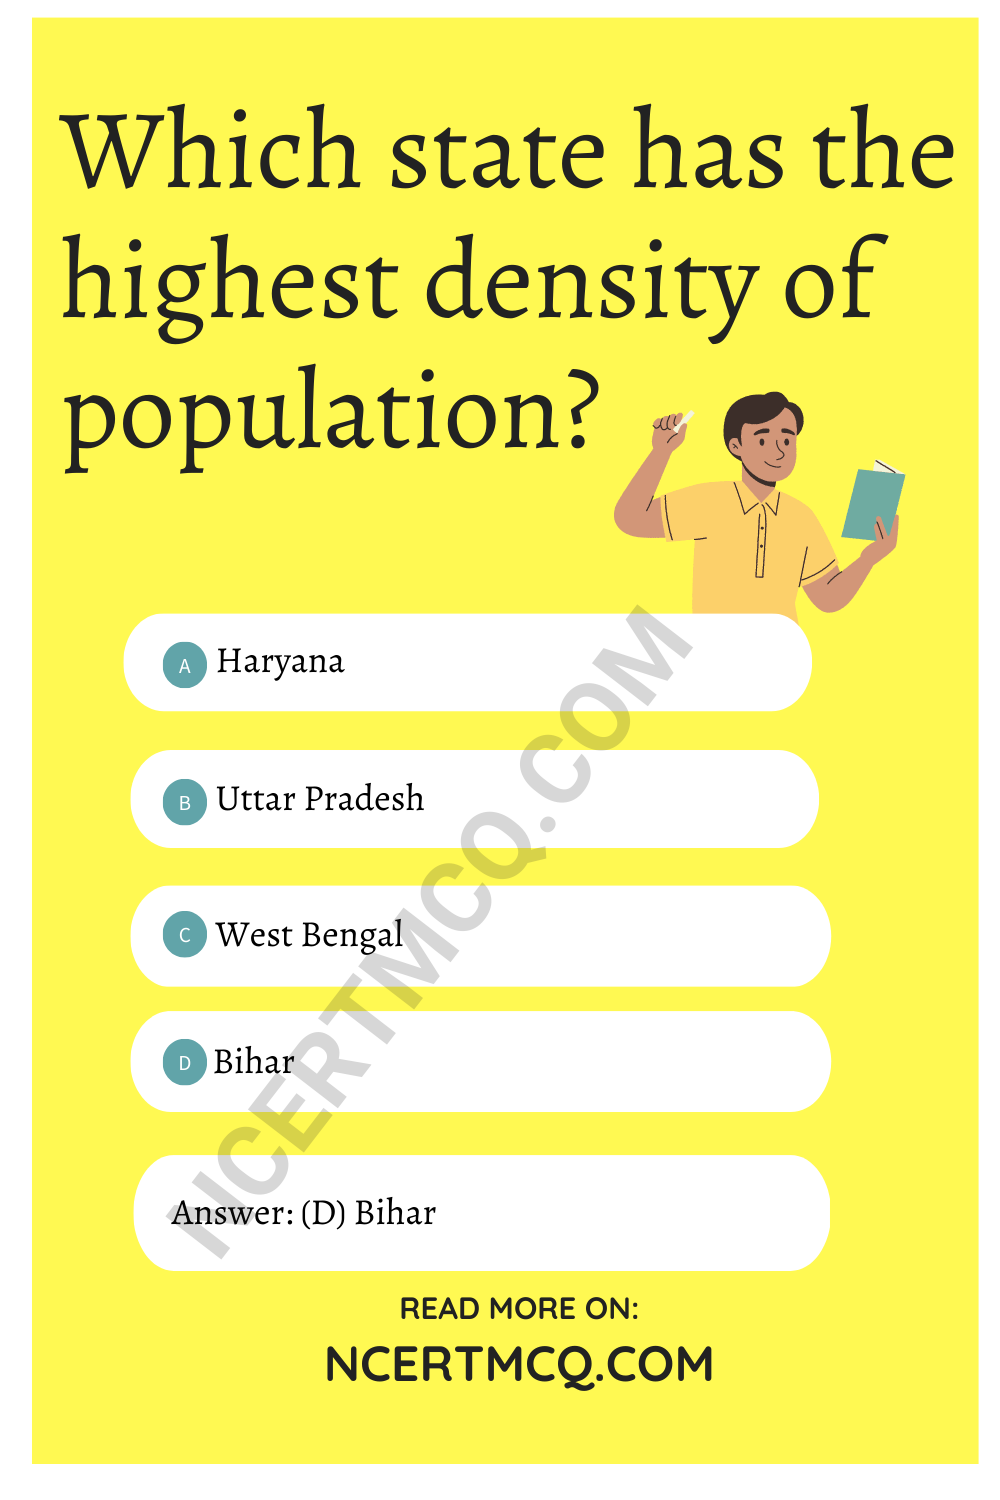 Which state has the highest density of population?